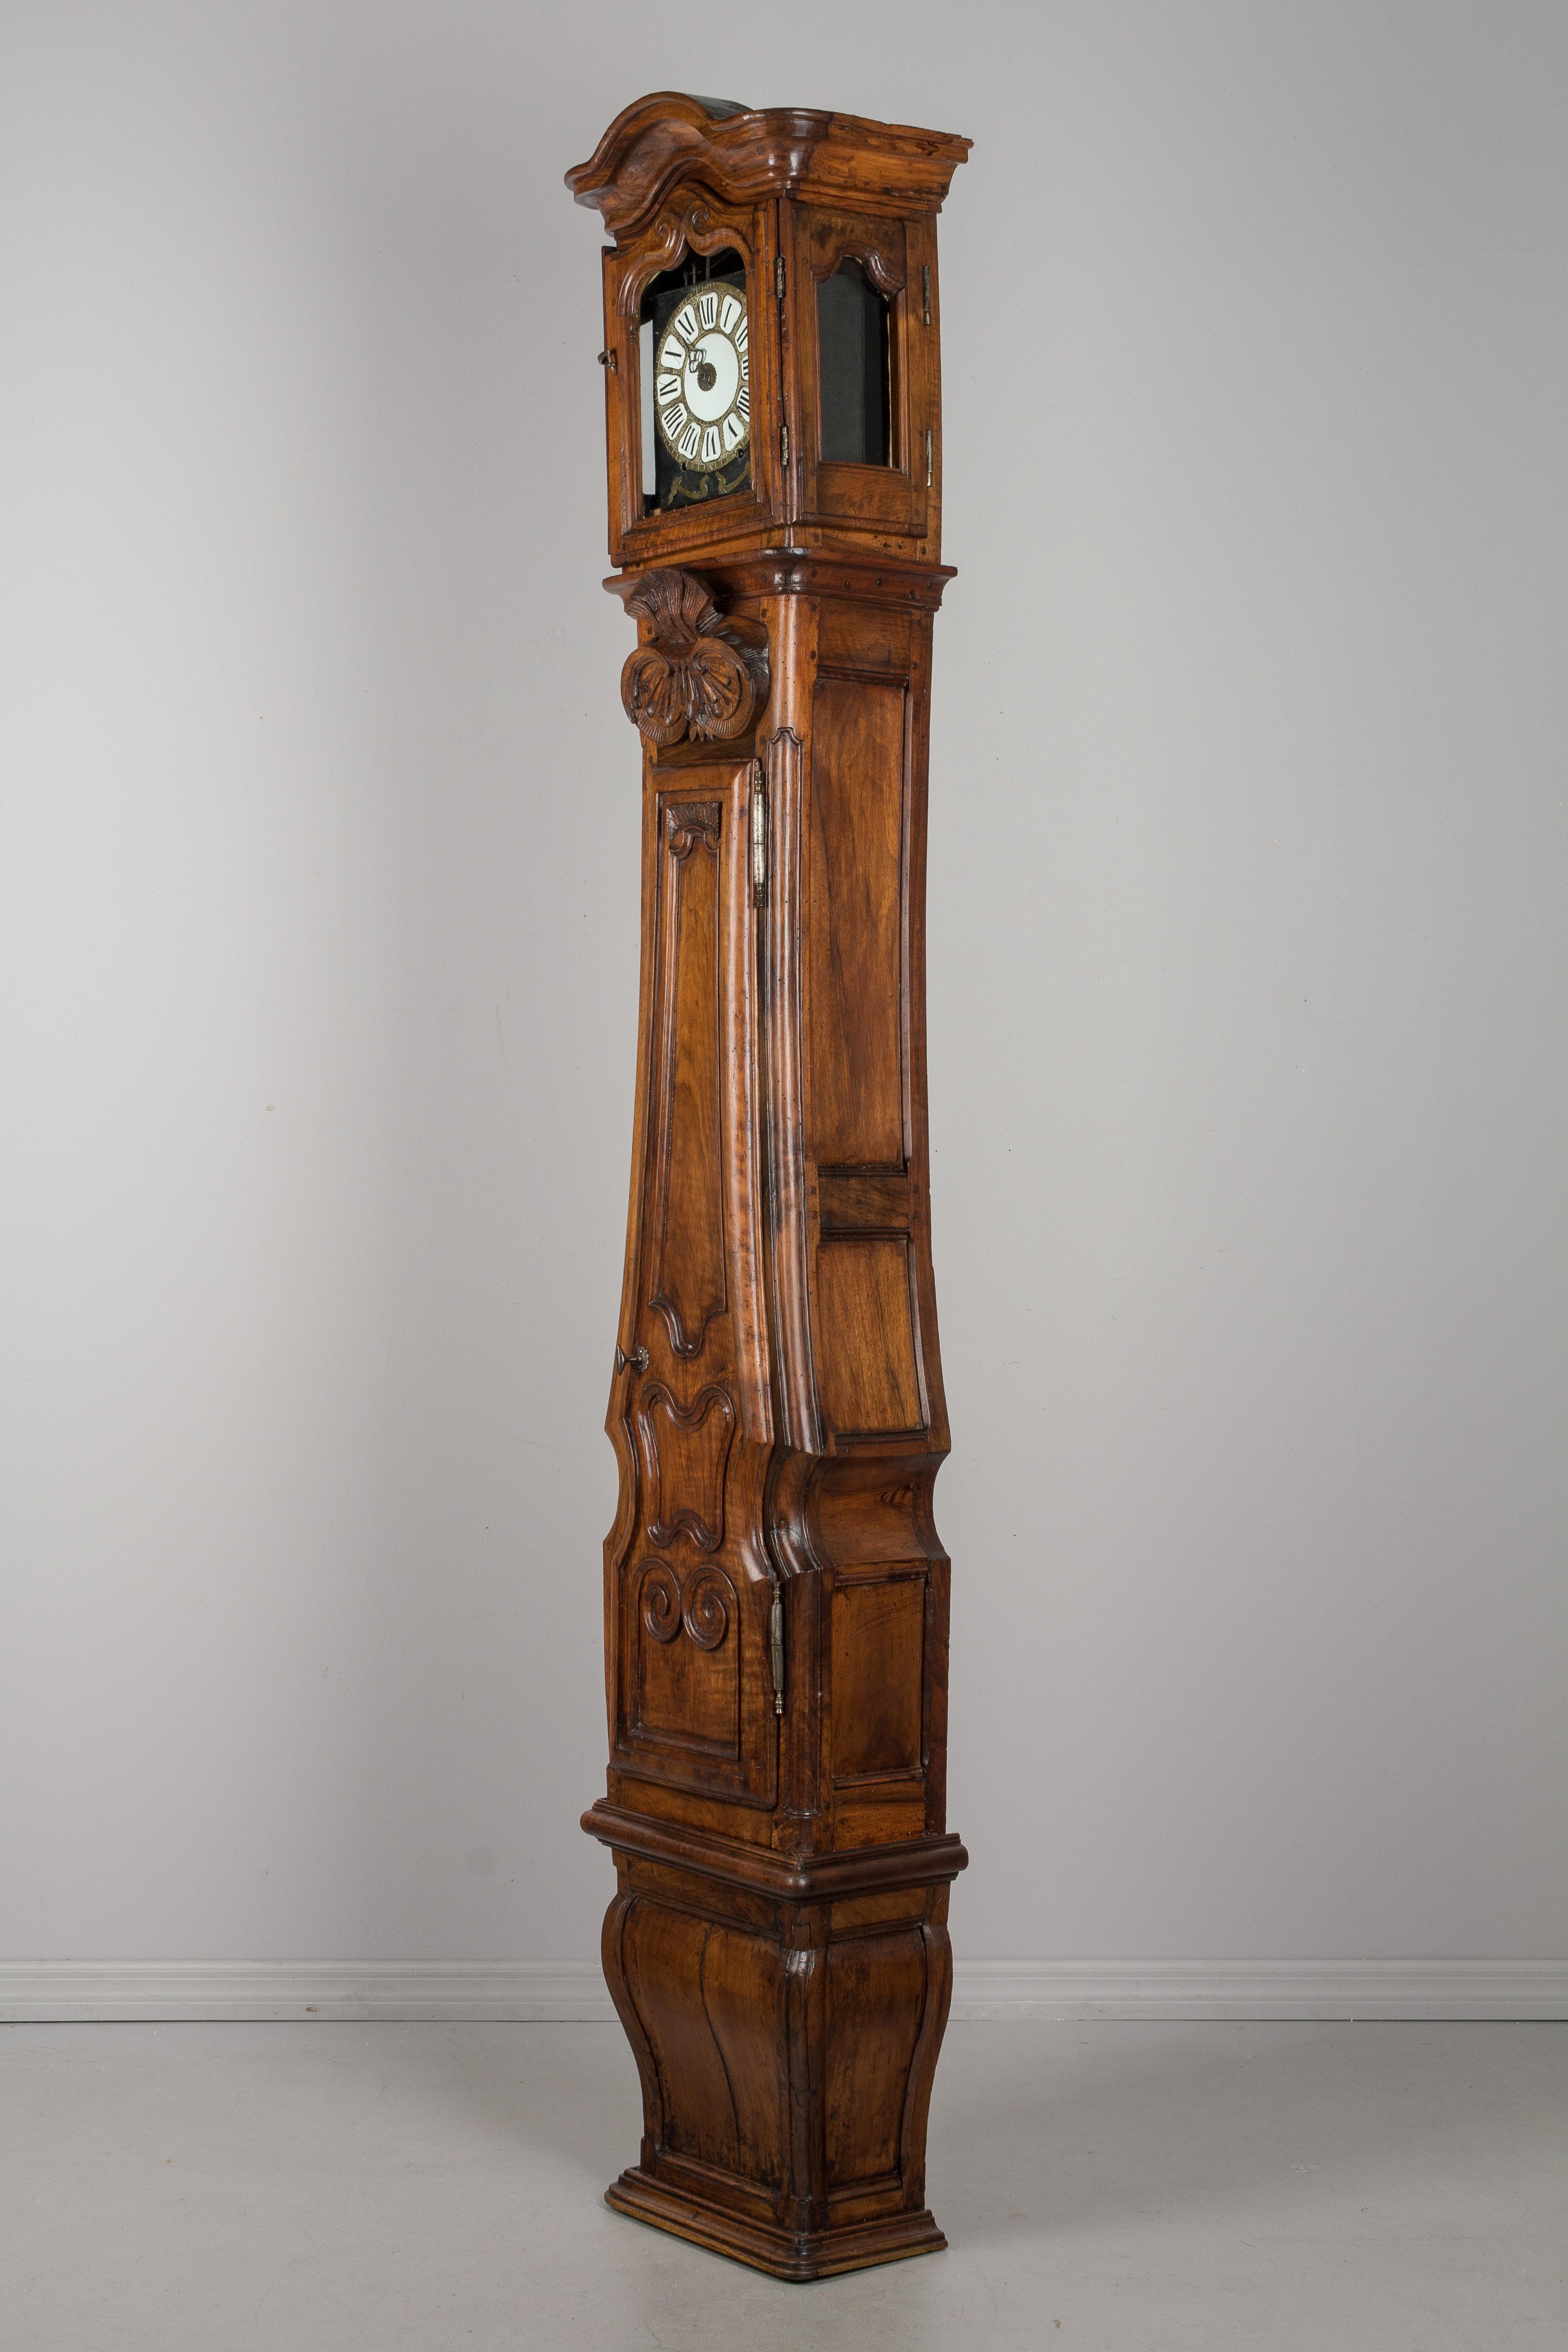 An exceptional 18th century French Horloge De Parquet, or tall case clock, from Lyon. Made of solid walnut and in three parts: a sturdy curved shaped base; the body with door panels carved into the wood; and top with original glass panes and chapeau